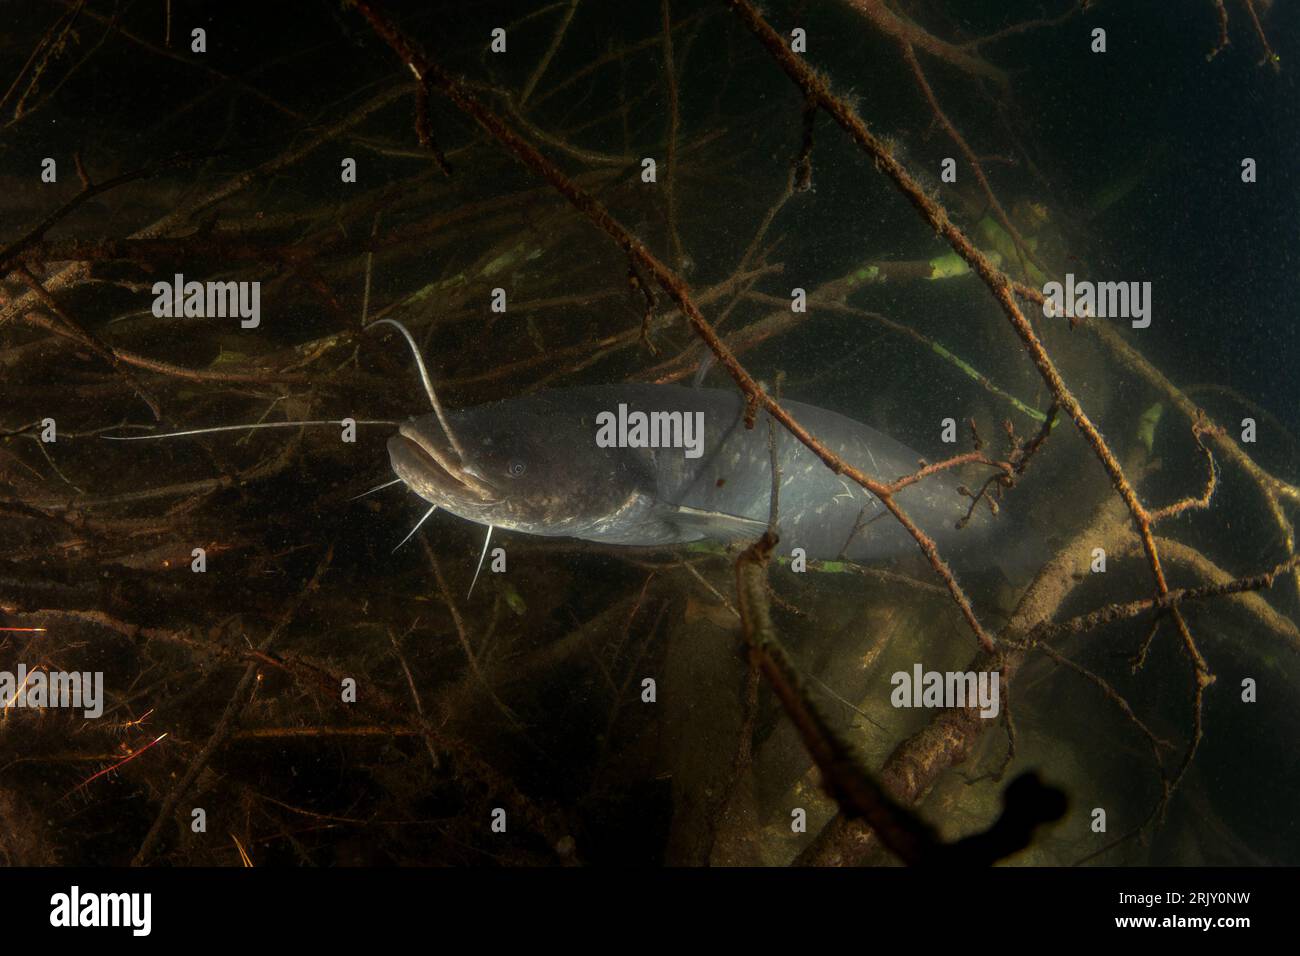 Catfish hiding among branches. Calm wels catfish in the lake. Big fish underwater. Fish life in fresh water. Stock Photo